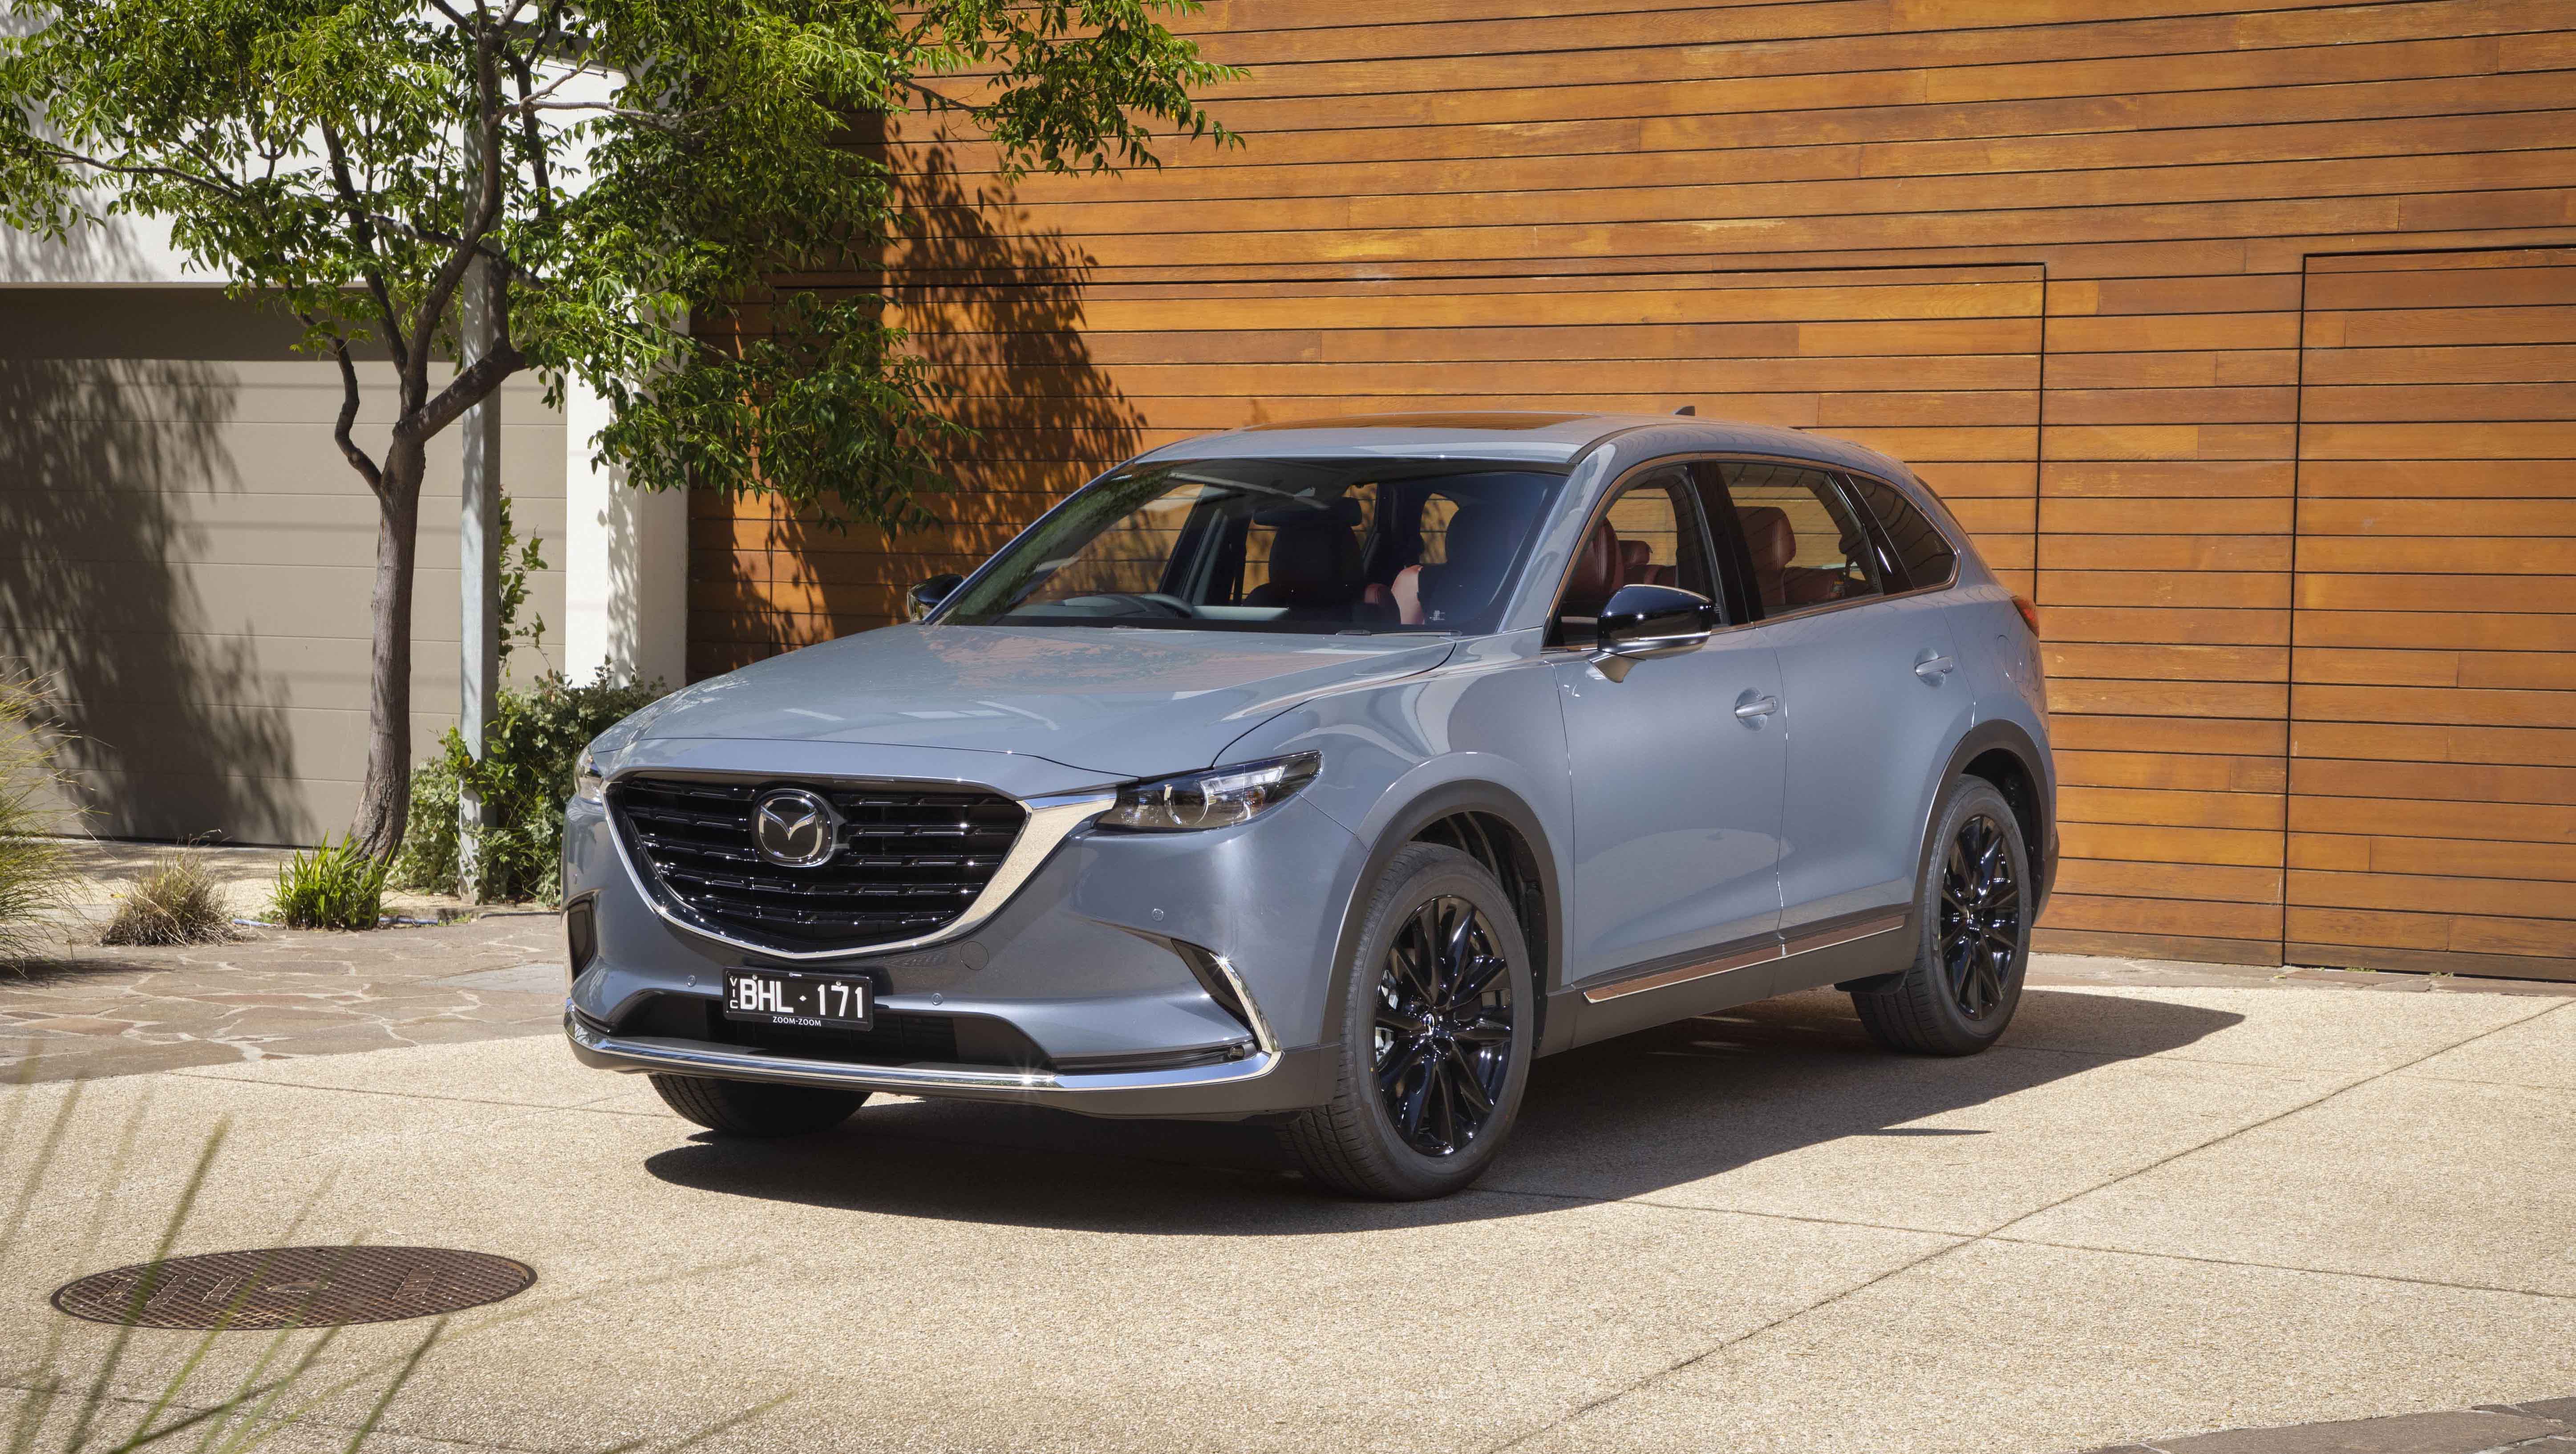 Mazda Cx 9 21 Review Touring Snapshot Carsguide